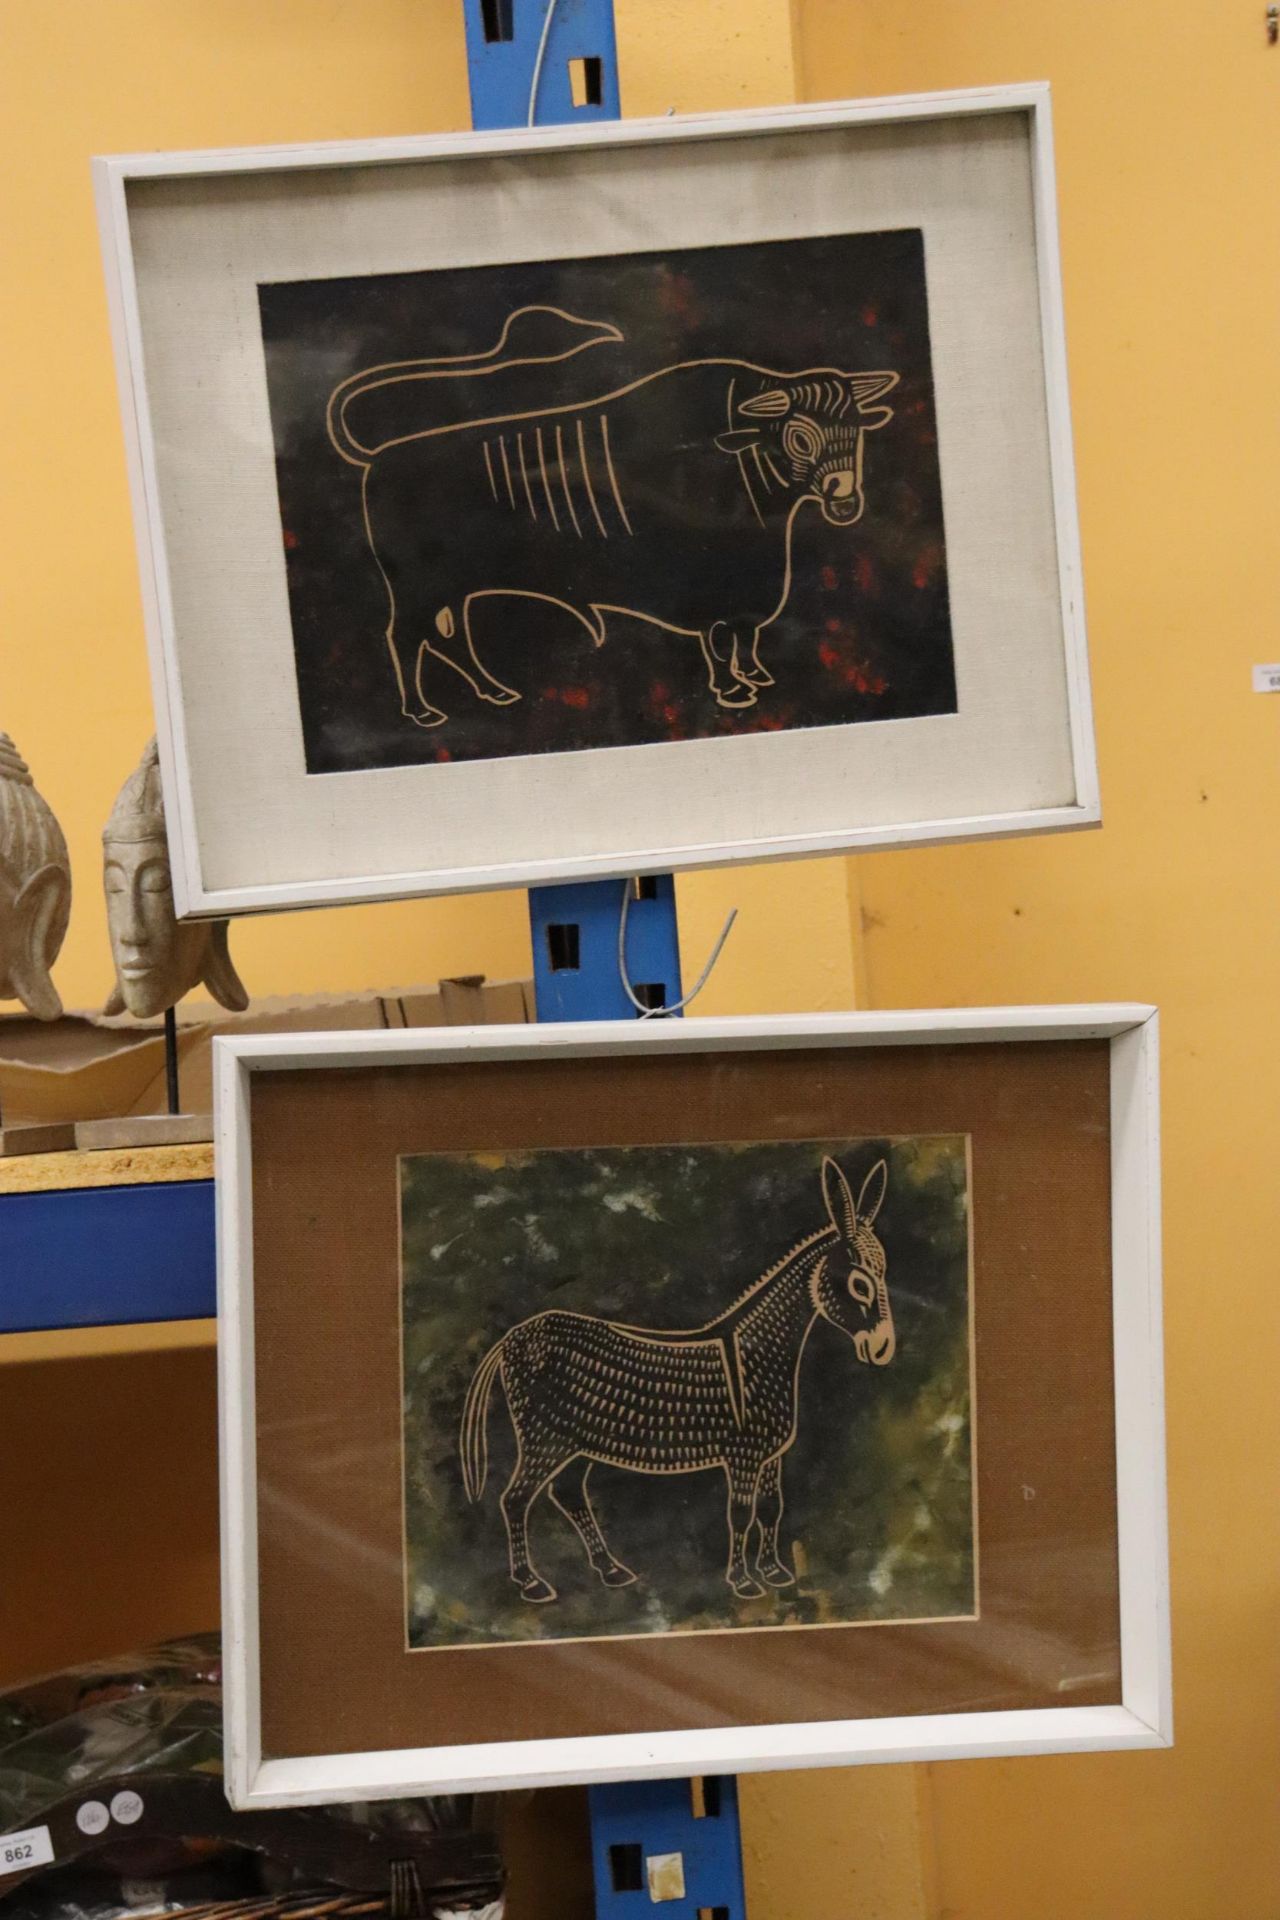 TWO ABORIGINAL DESIGN PRINTS OF A BULL AND A DONKEY